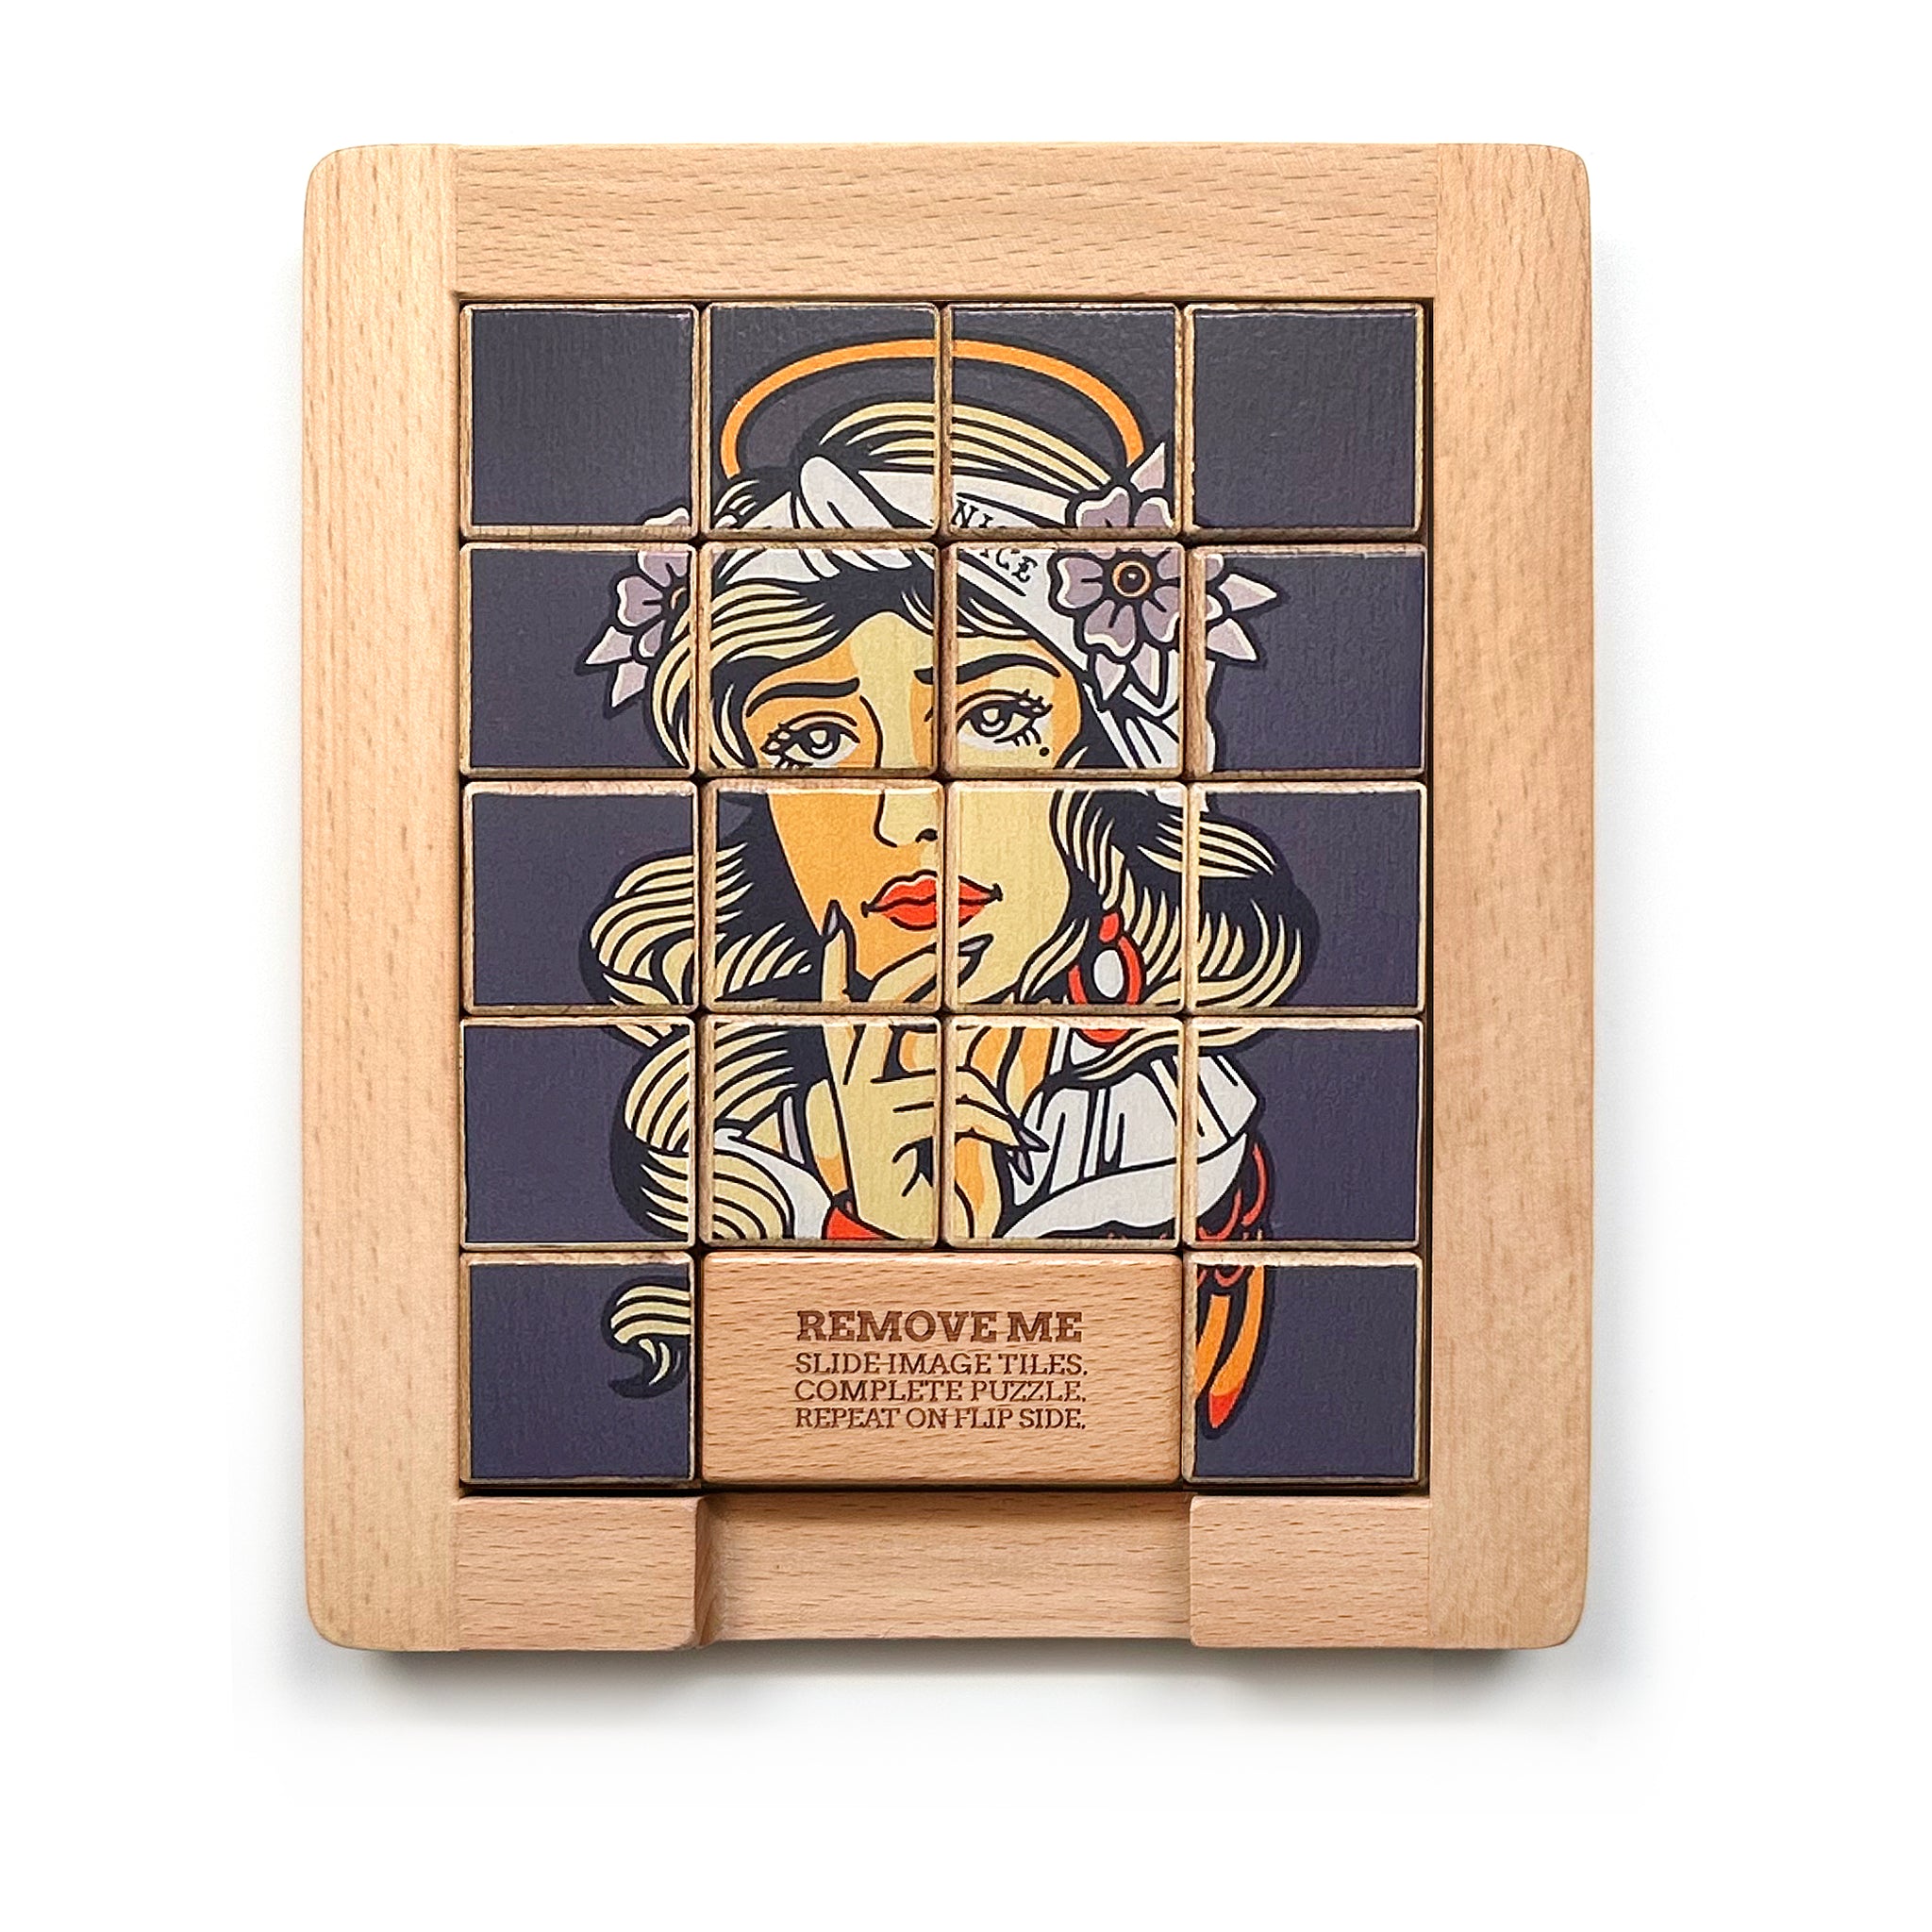 The back side of Dualities Wooden Sliding Puzzle: Naughty v. Nice 2 sided puzzle